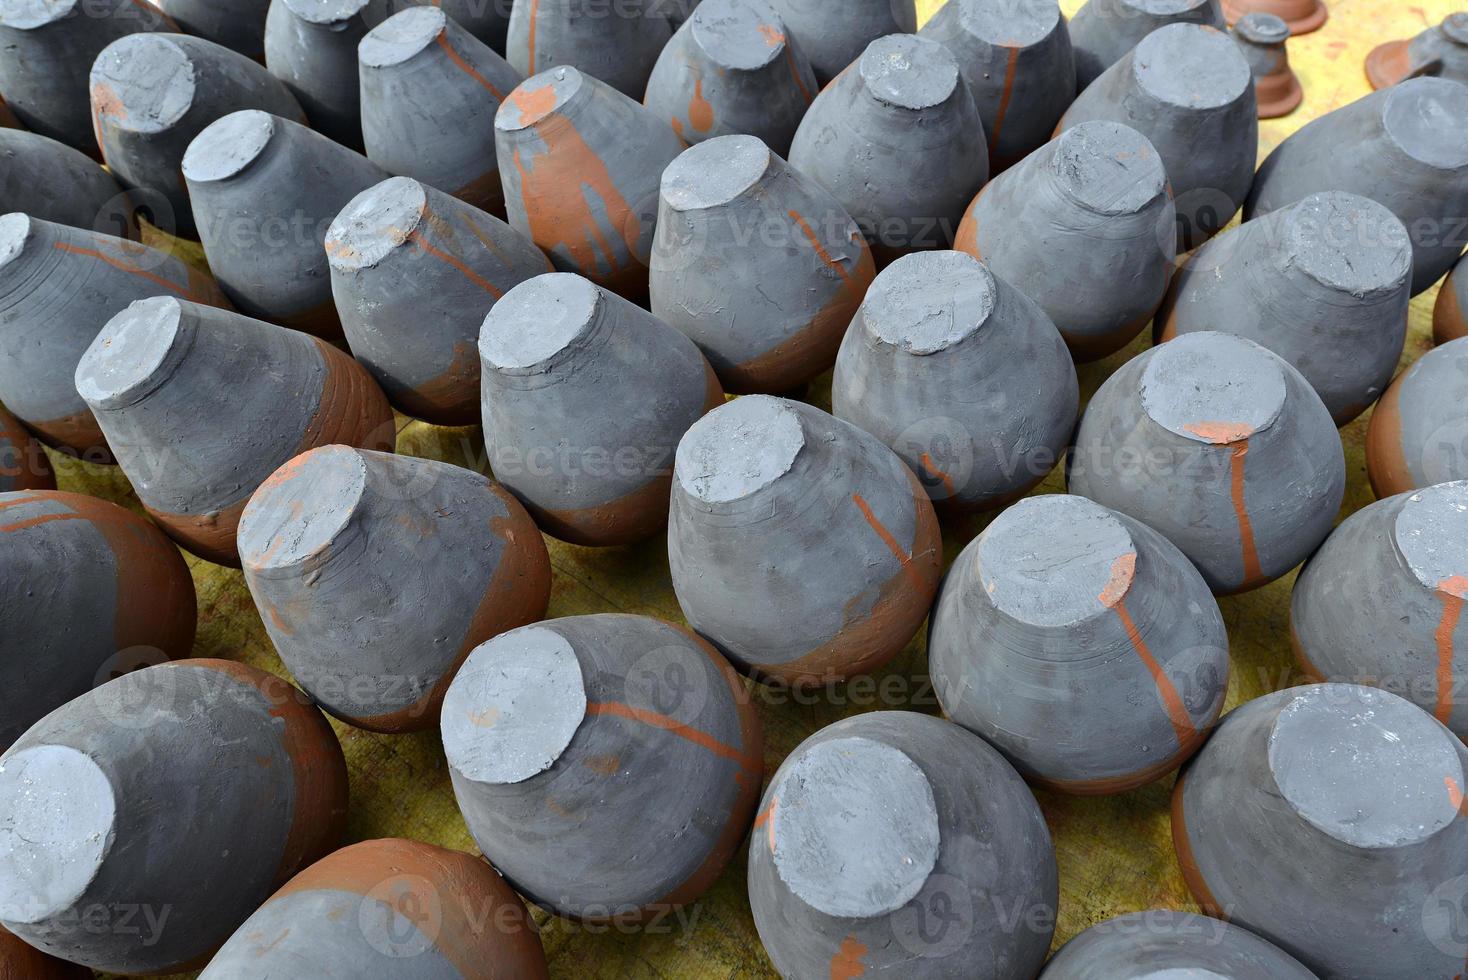 Rows of handmade traditional potteries in Bhaktapur, Nepal photo